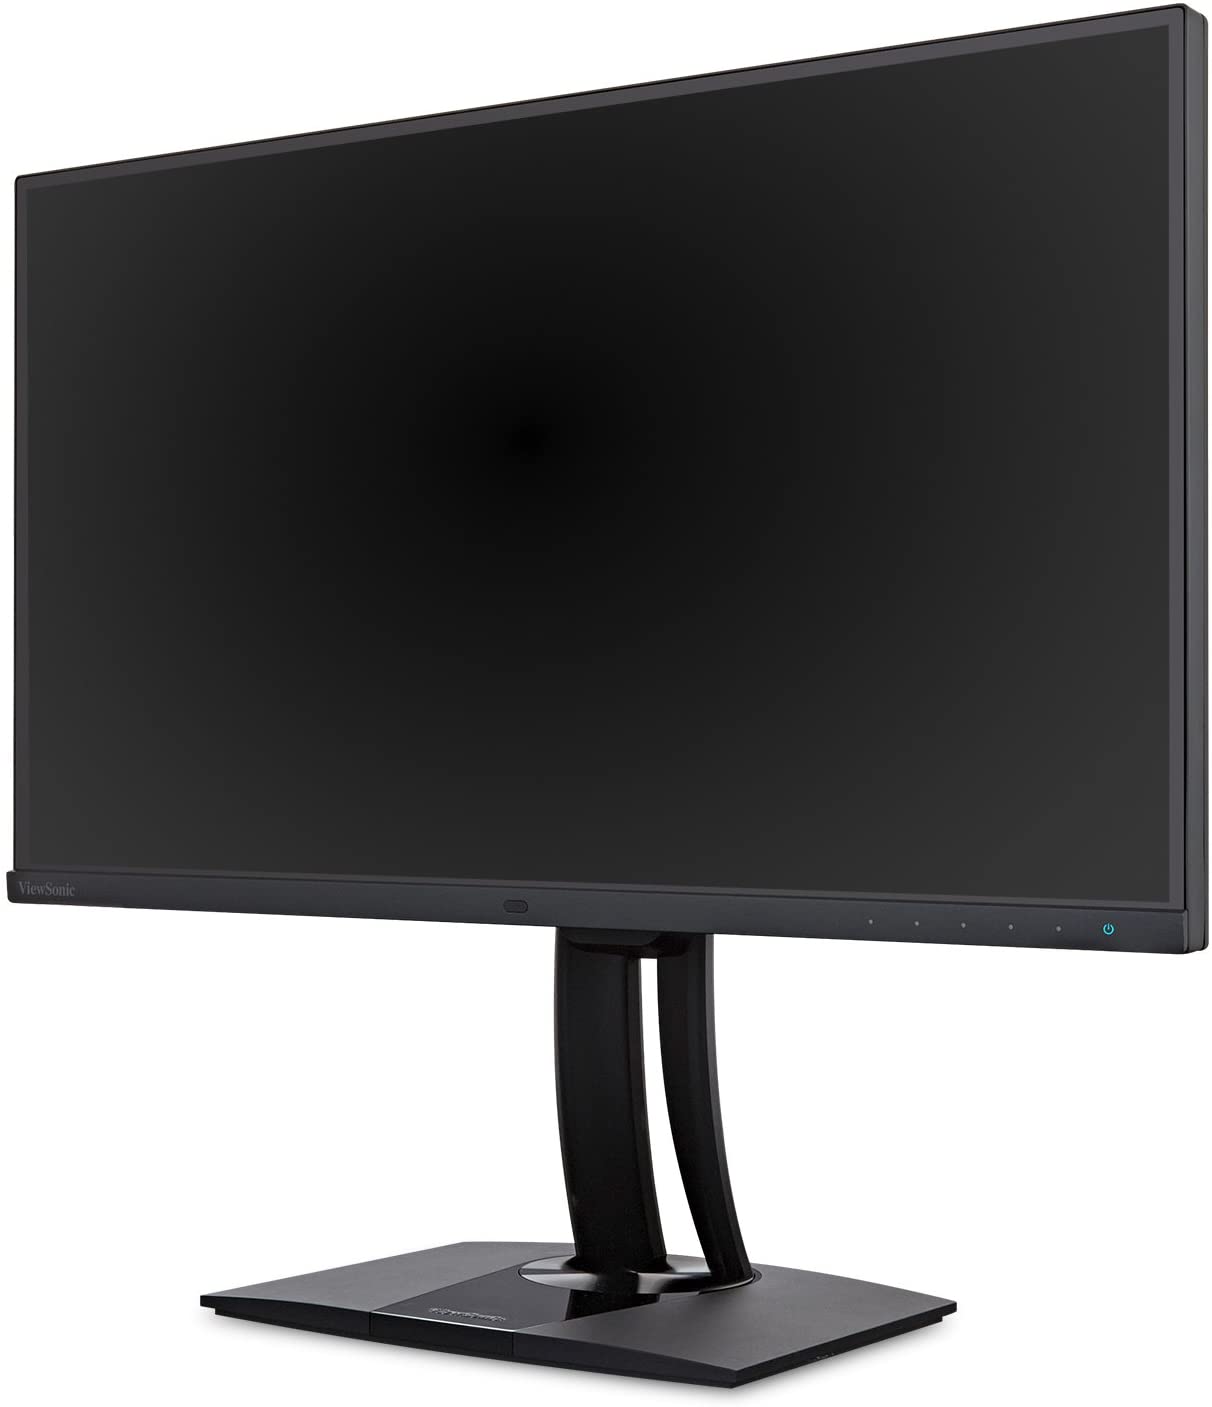 monitor buying guide image 